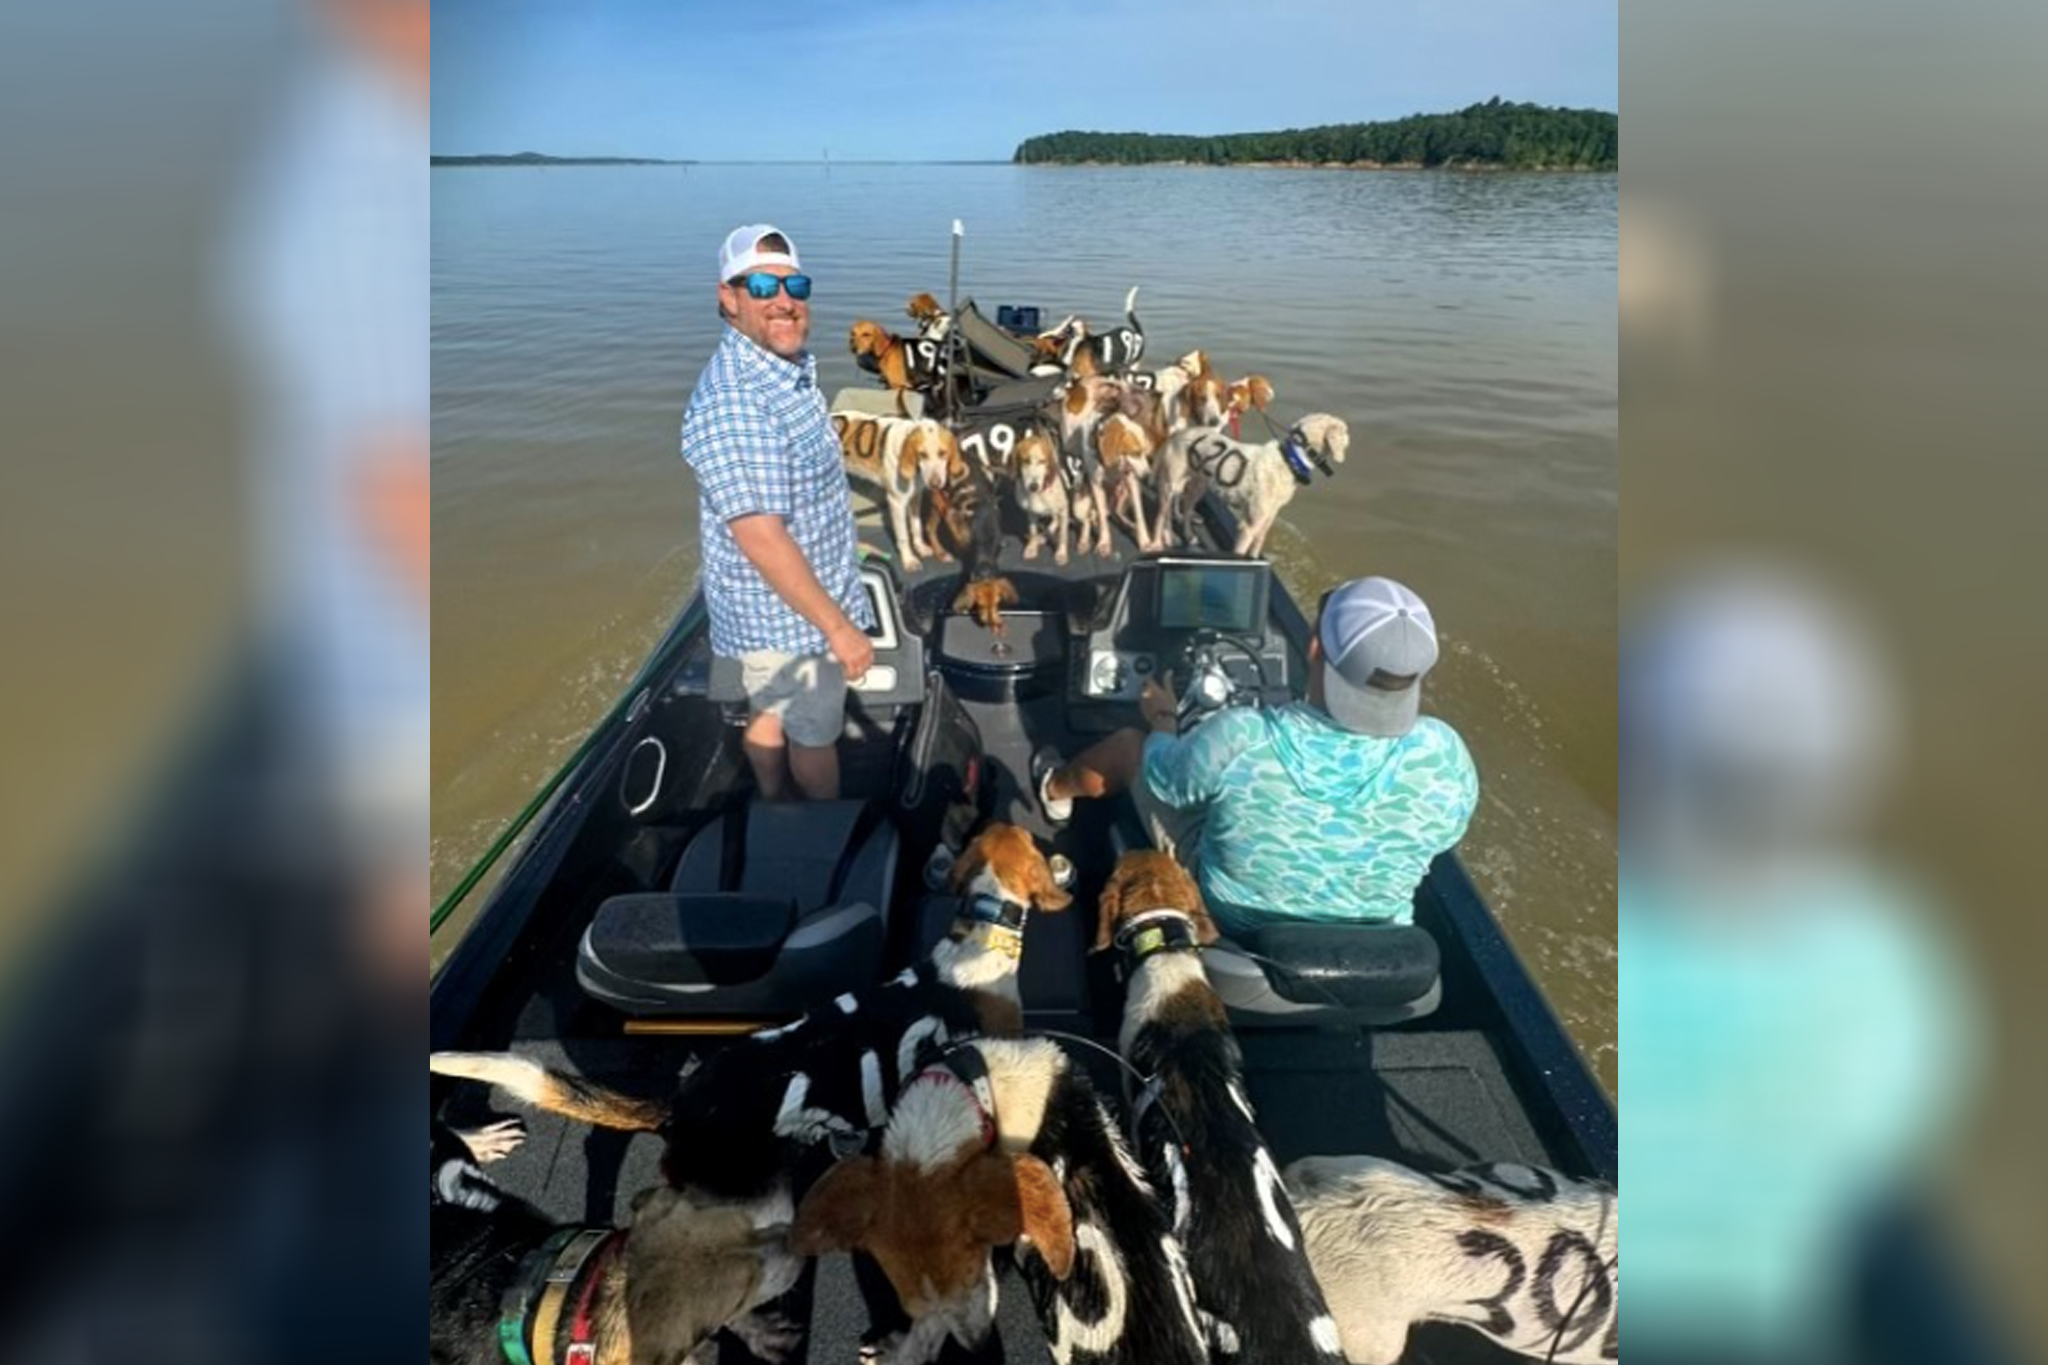 The three men grabbed the exhausted dogs by their collars and dragged them into their boat